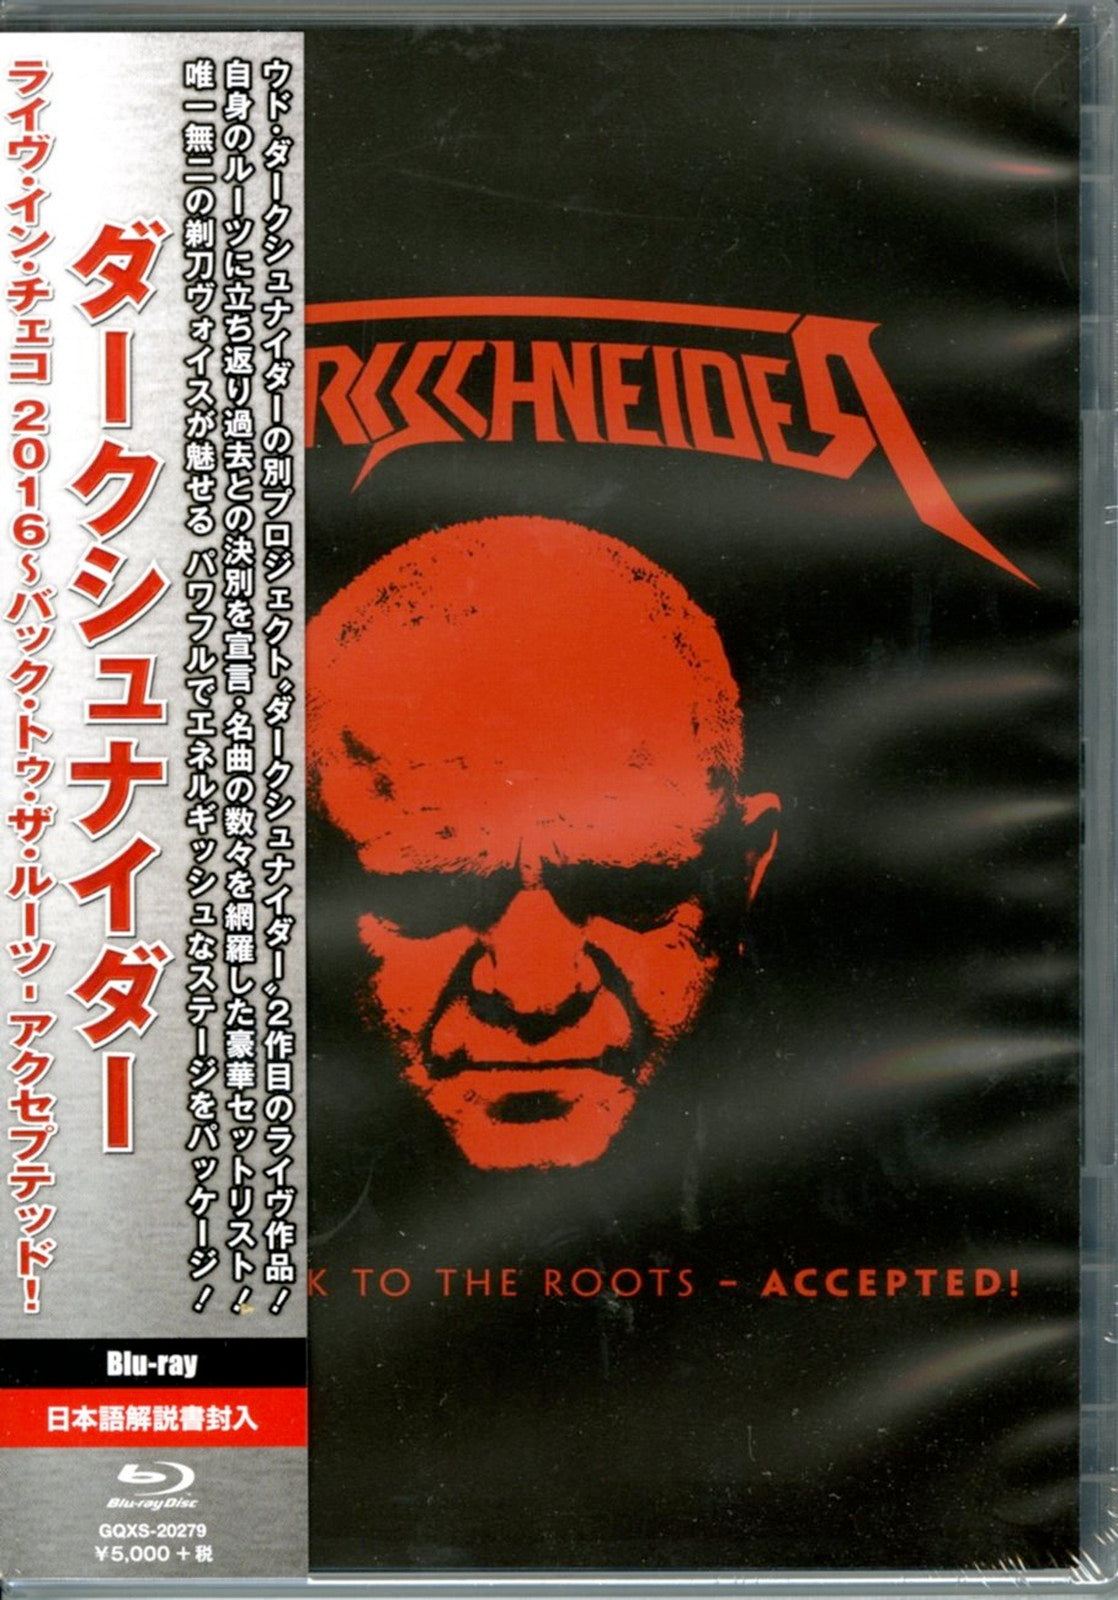 Dirkschneider - Live - Back To The Roots - Accepted! - Bonus Track - Blu-ray